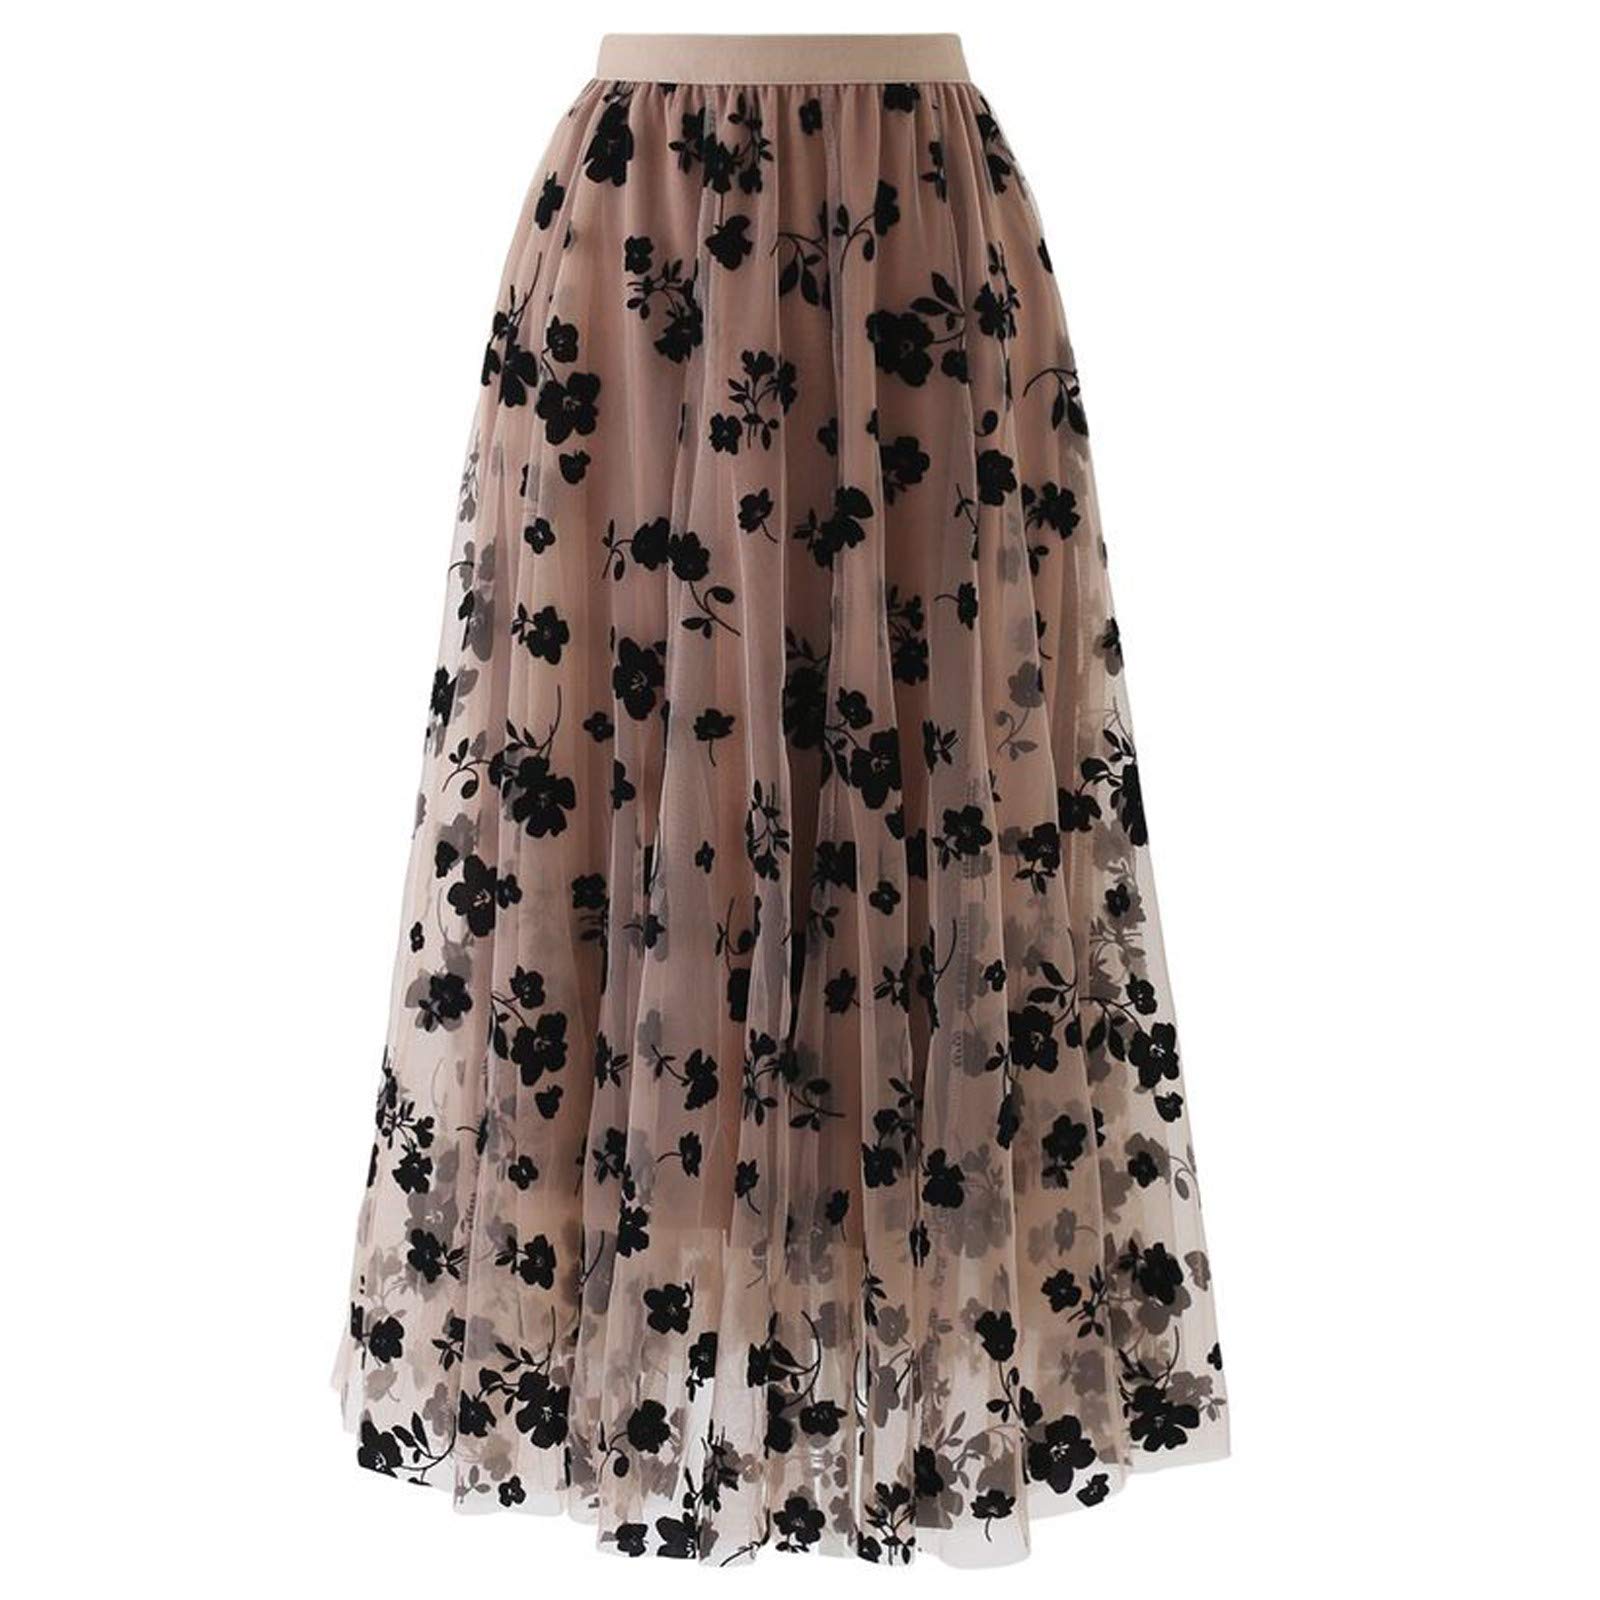 Long Skirts for Women Swing Floral Print Tulle SALE!